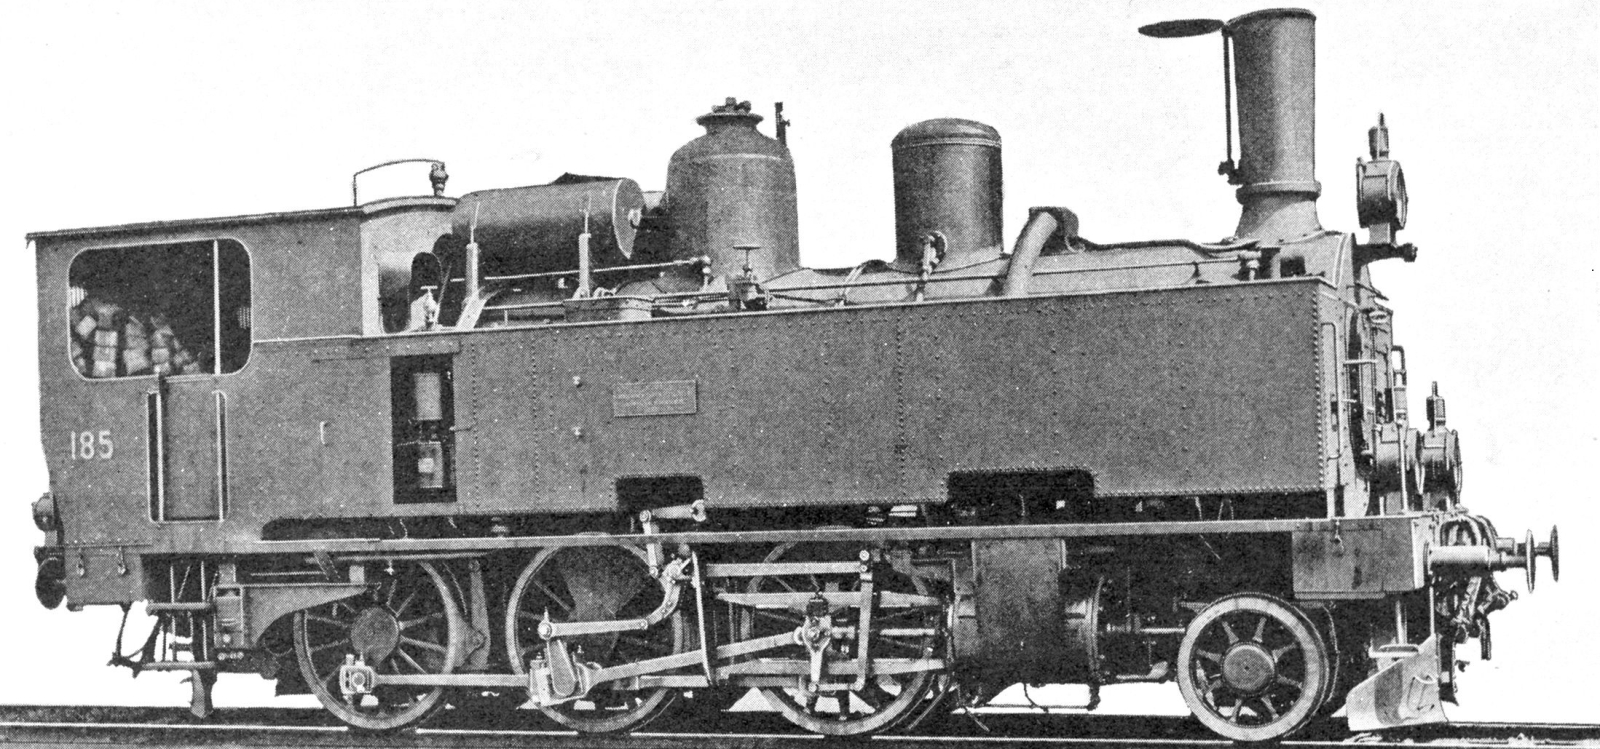 No. 185, former No. 85 from the first series from Esslingen